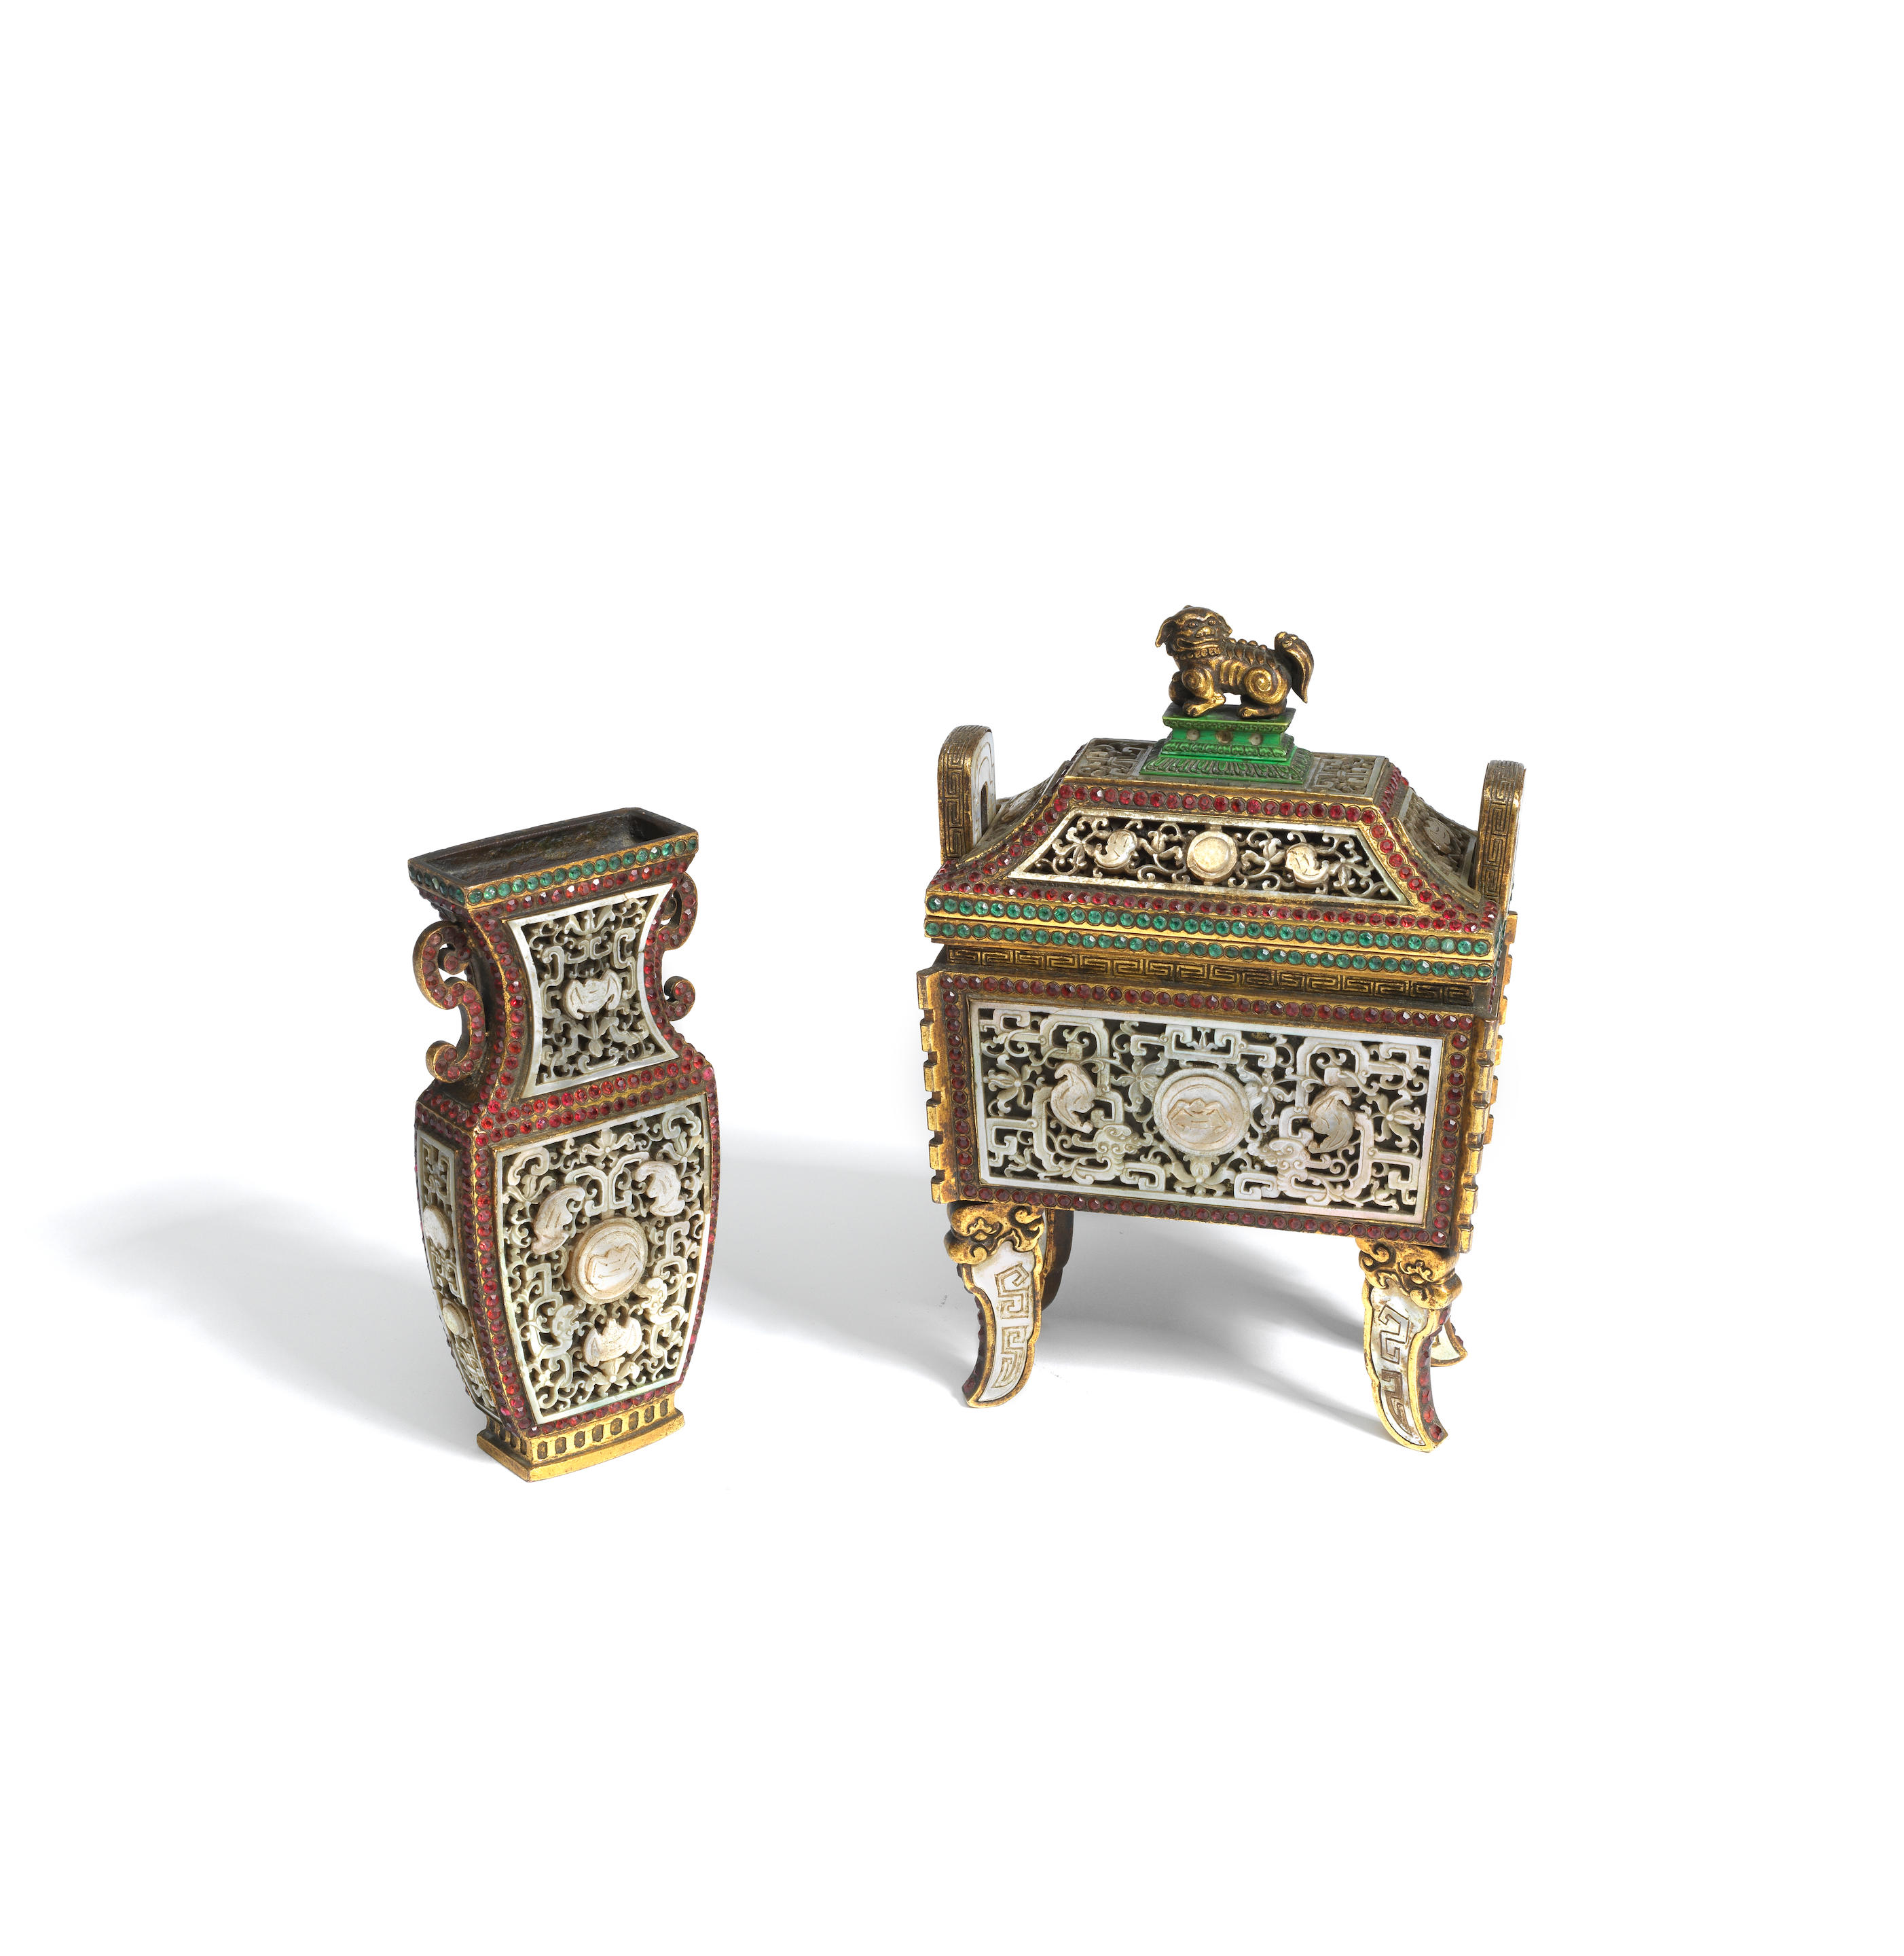 A GILT-BRONZE GLASS AND MOTHER OF PEARL INLAID INCENSE BURNER AND COVER AND...